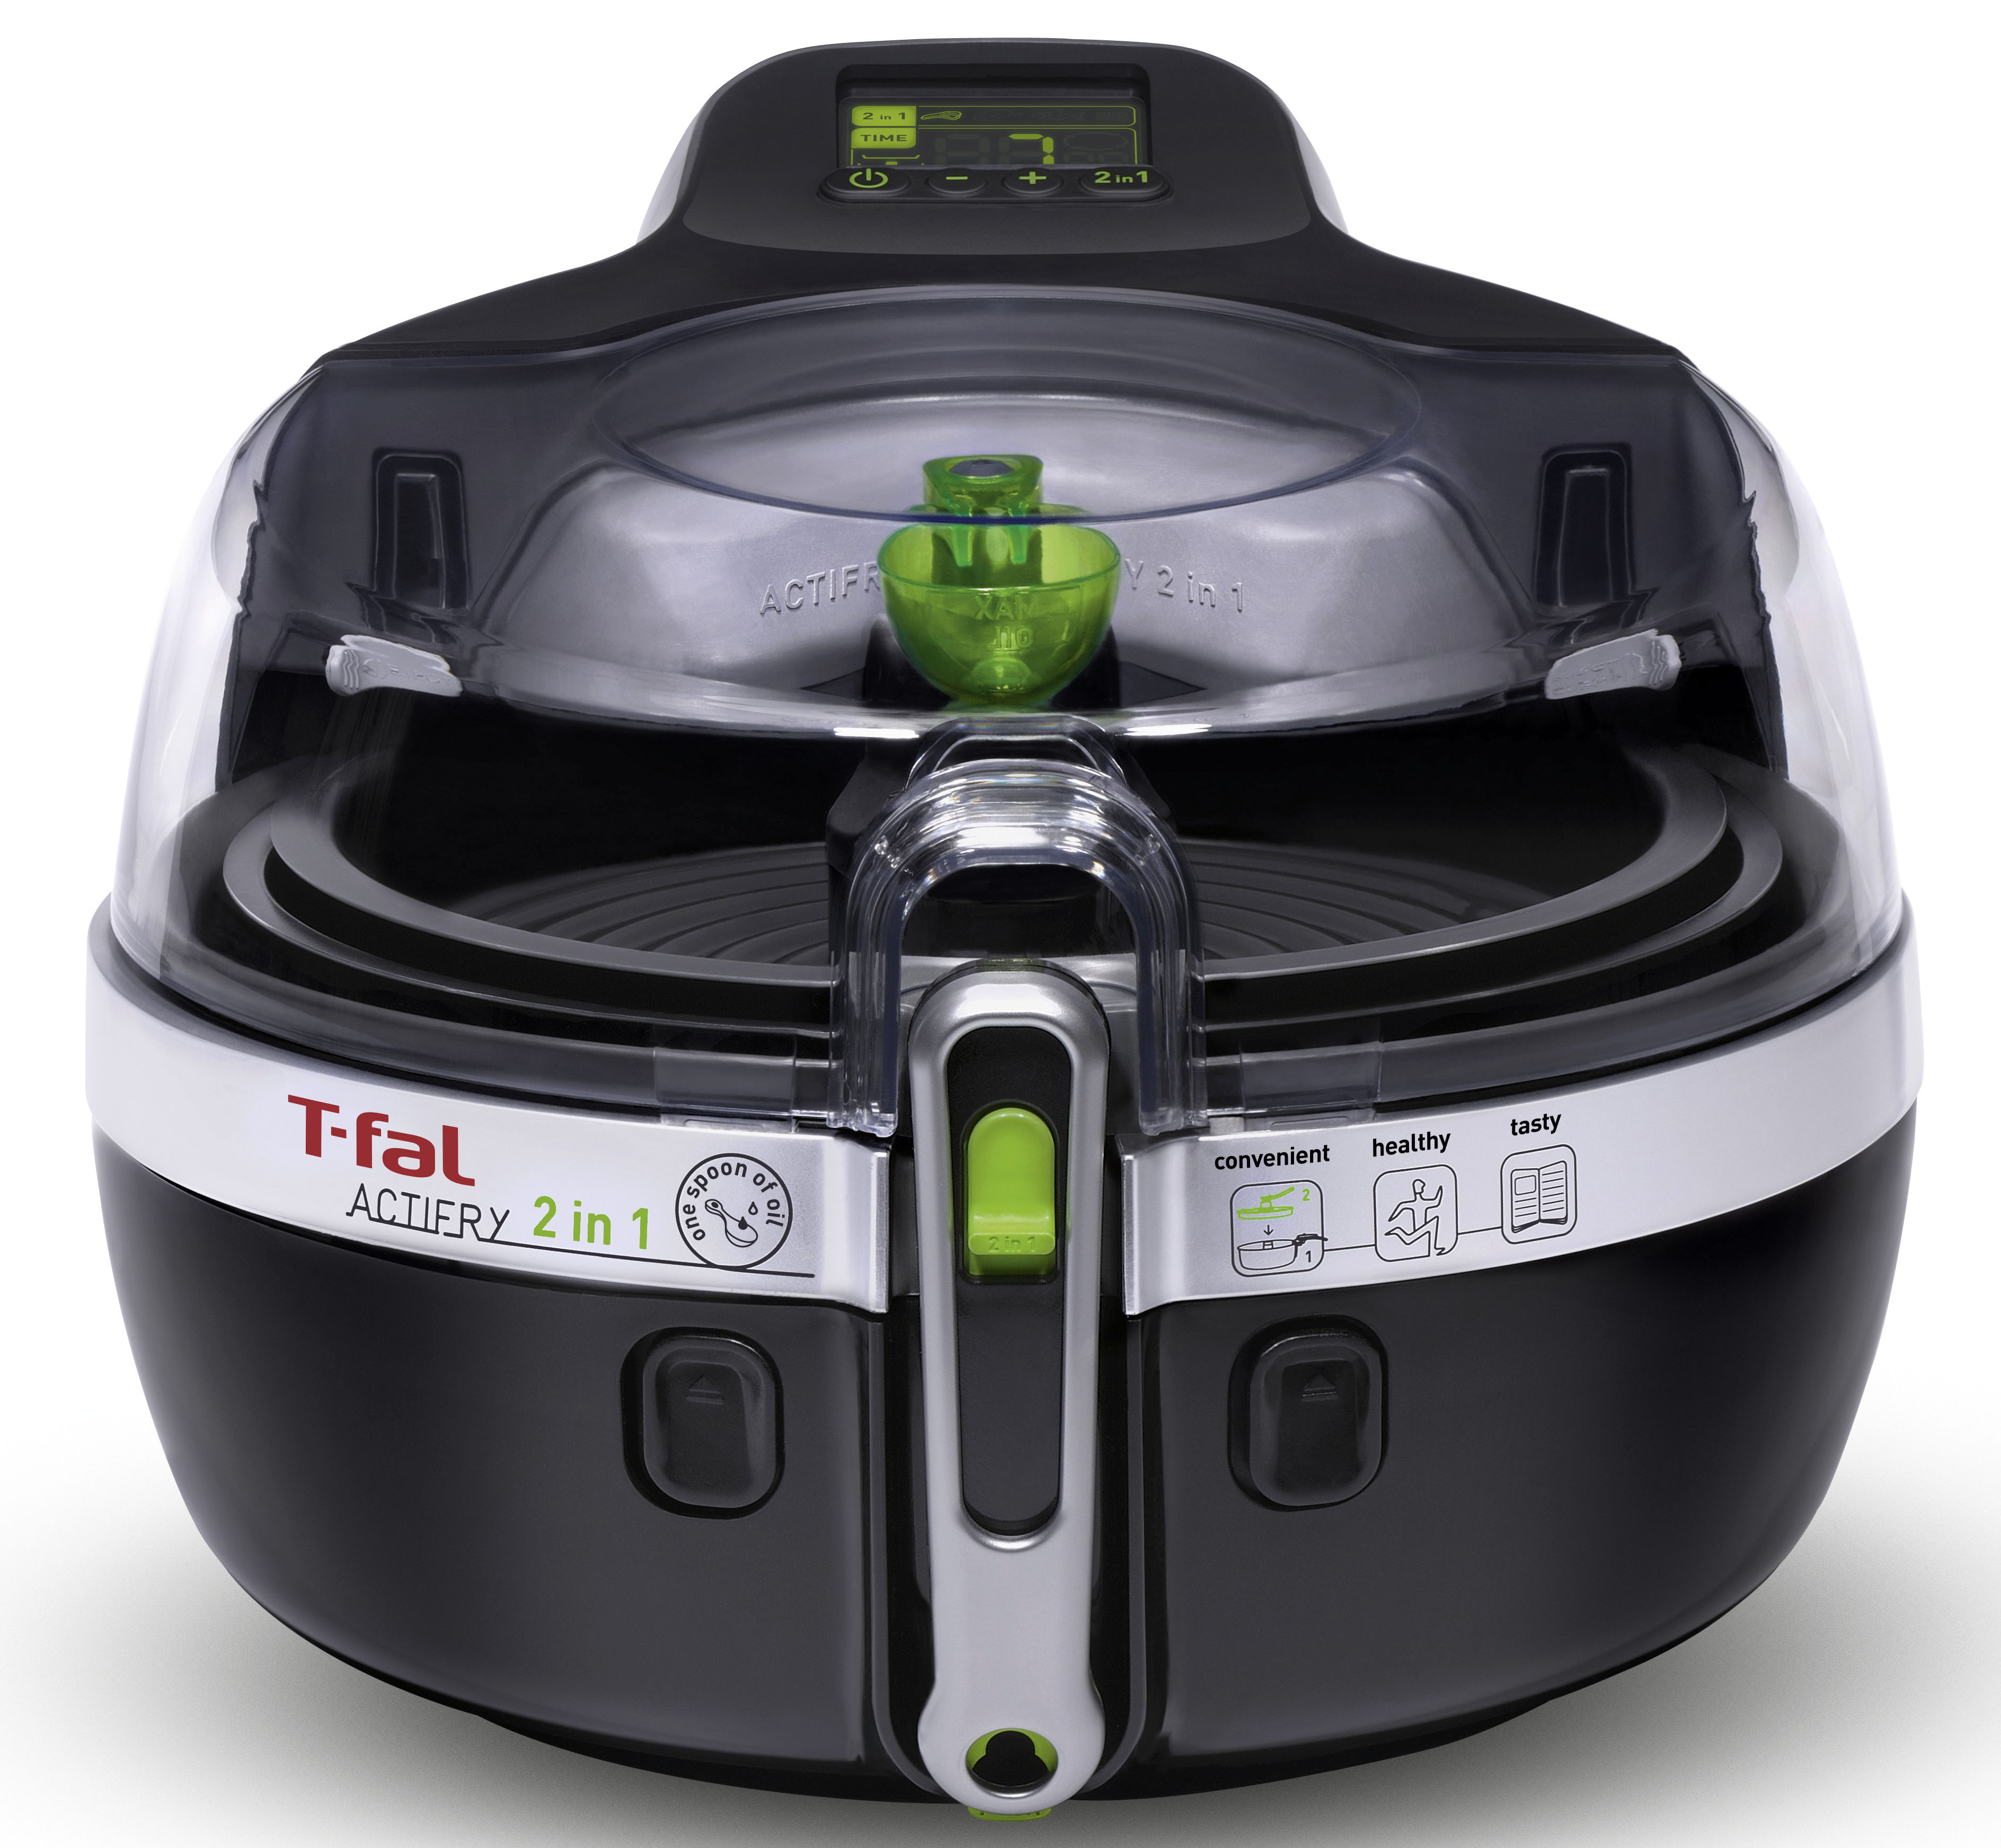 T-fal ActiFry 2in1